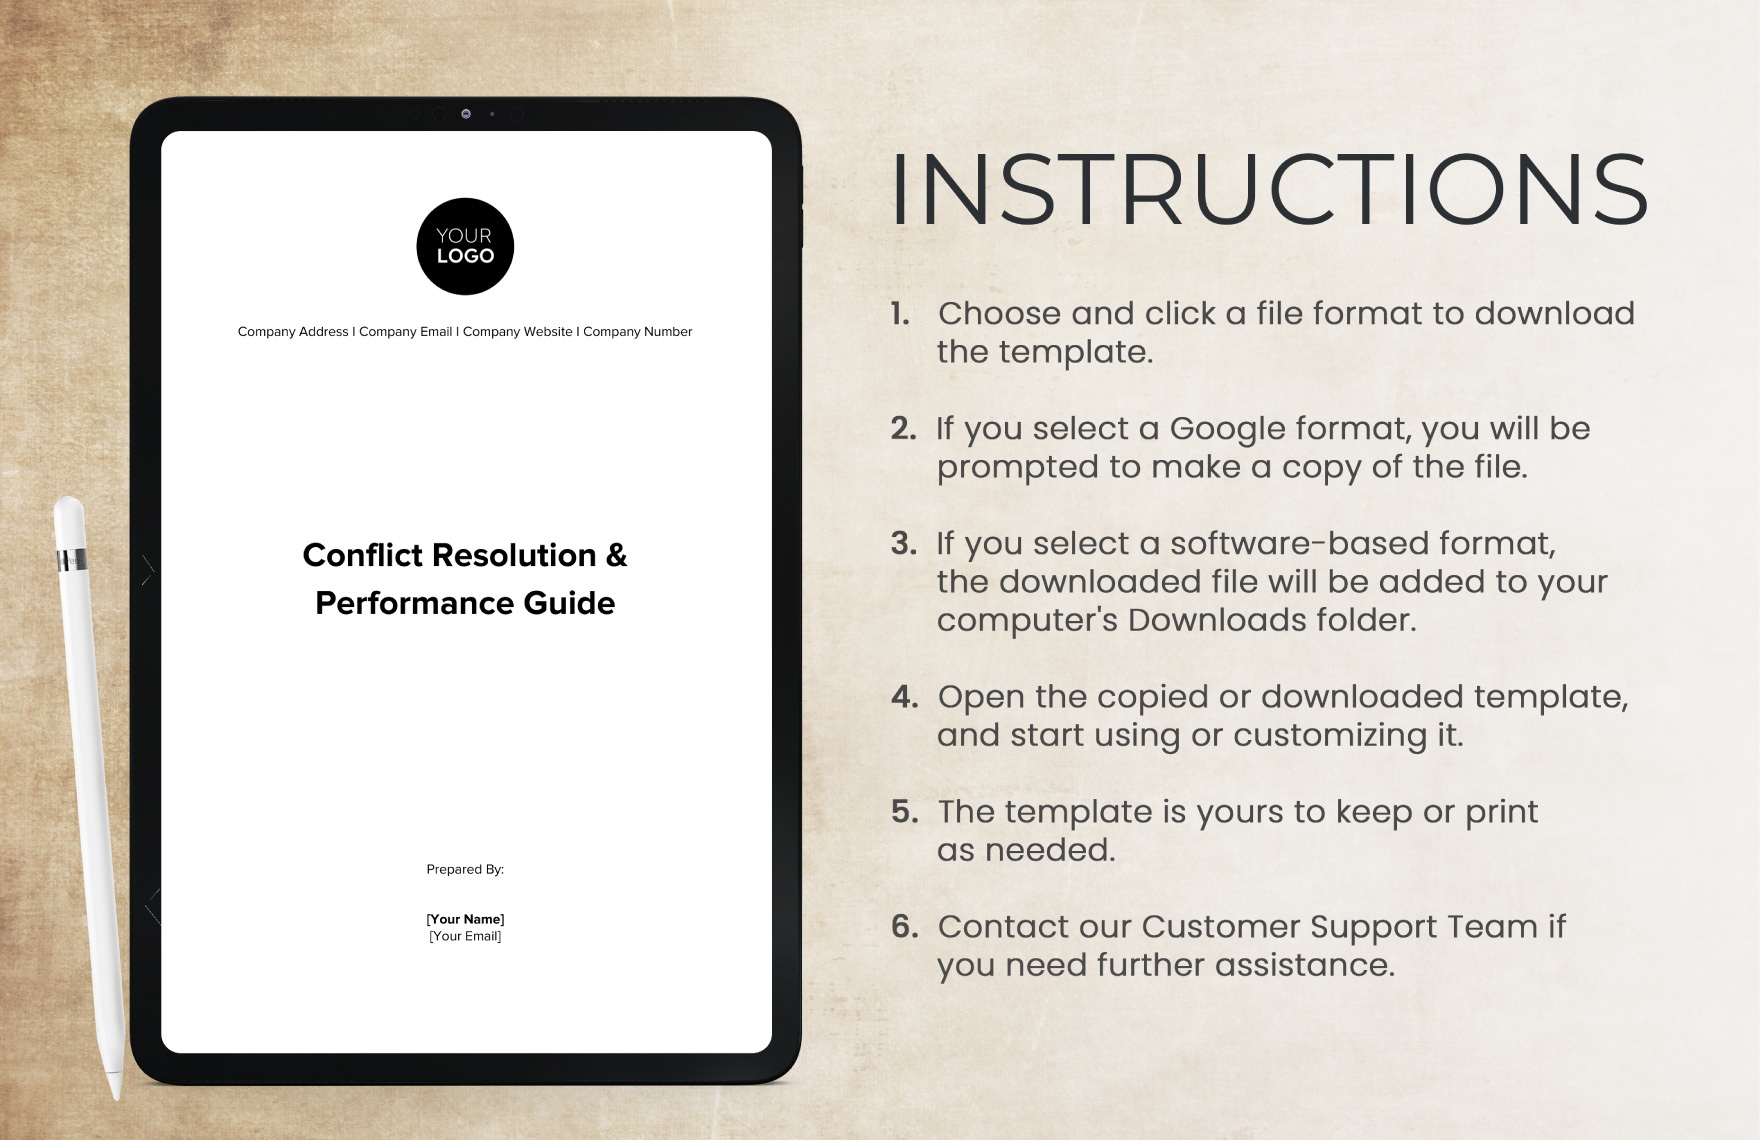 Conflict Resolution & Performance Guide HR Template